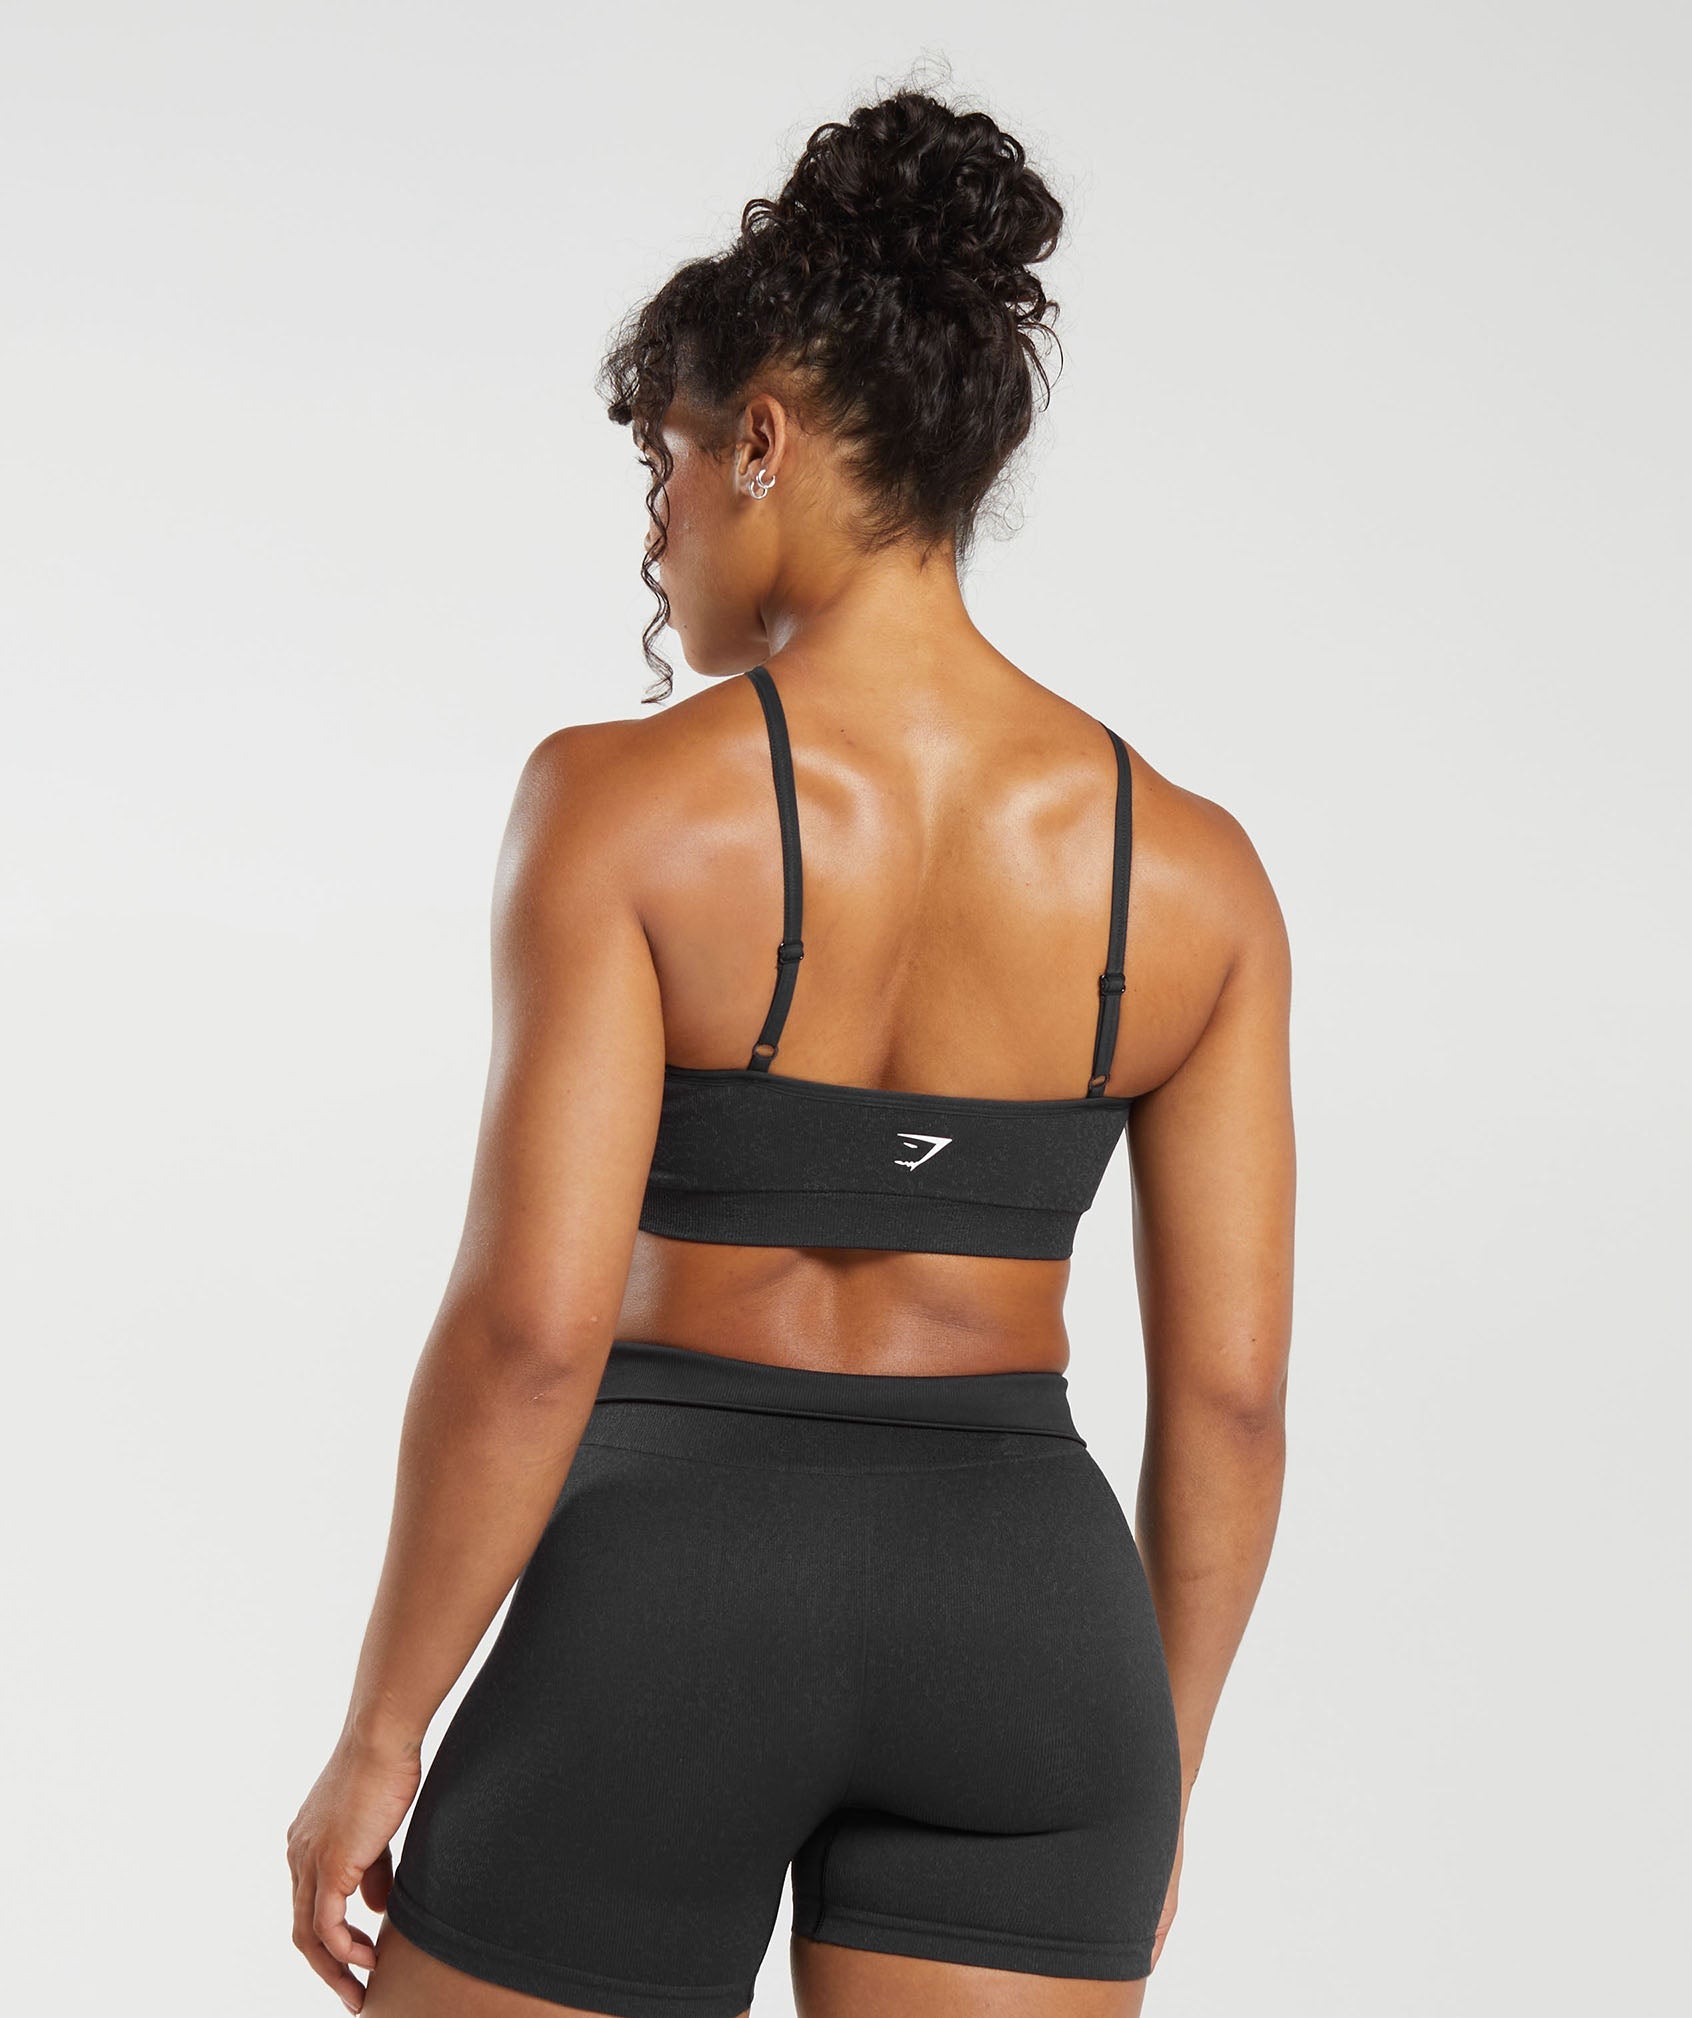 Gifts for Gym Lovers - Gift ideas for Women's - Gymshark